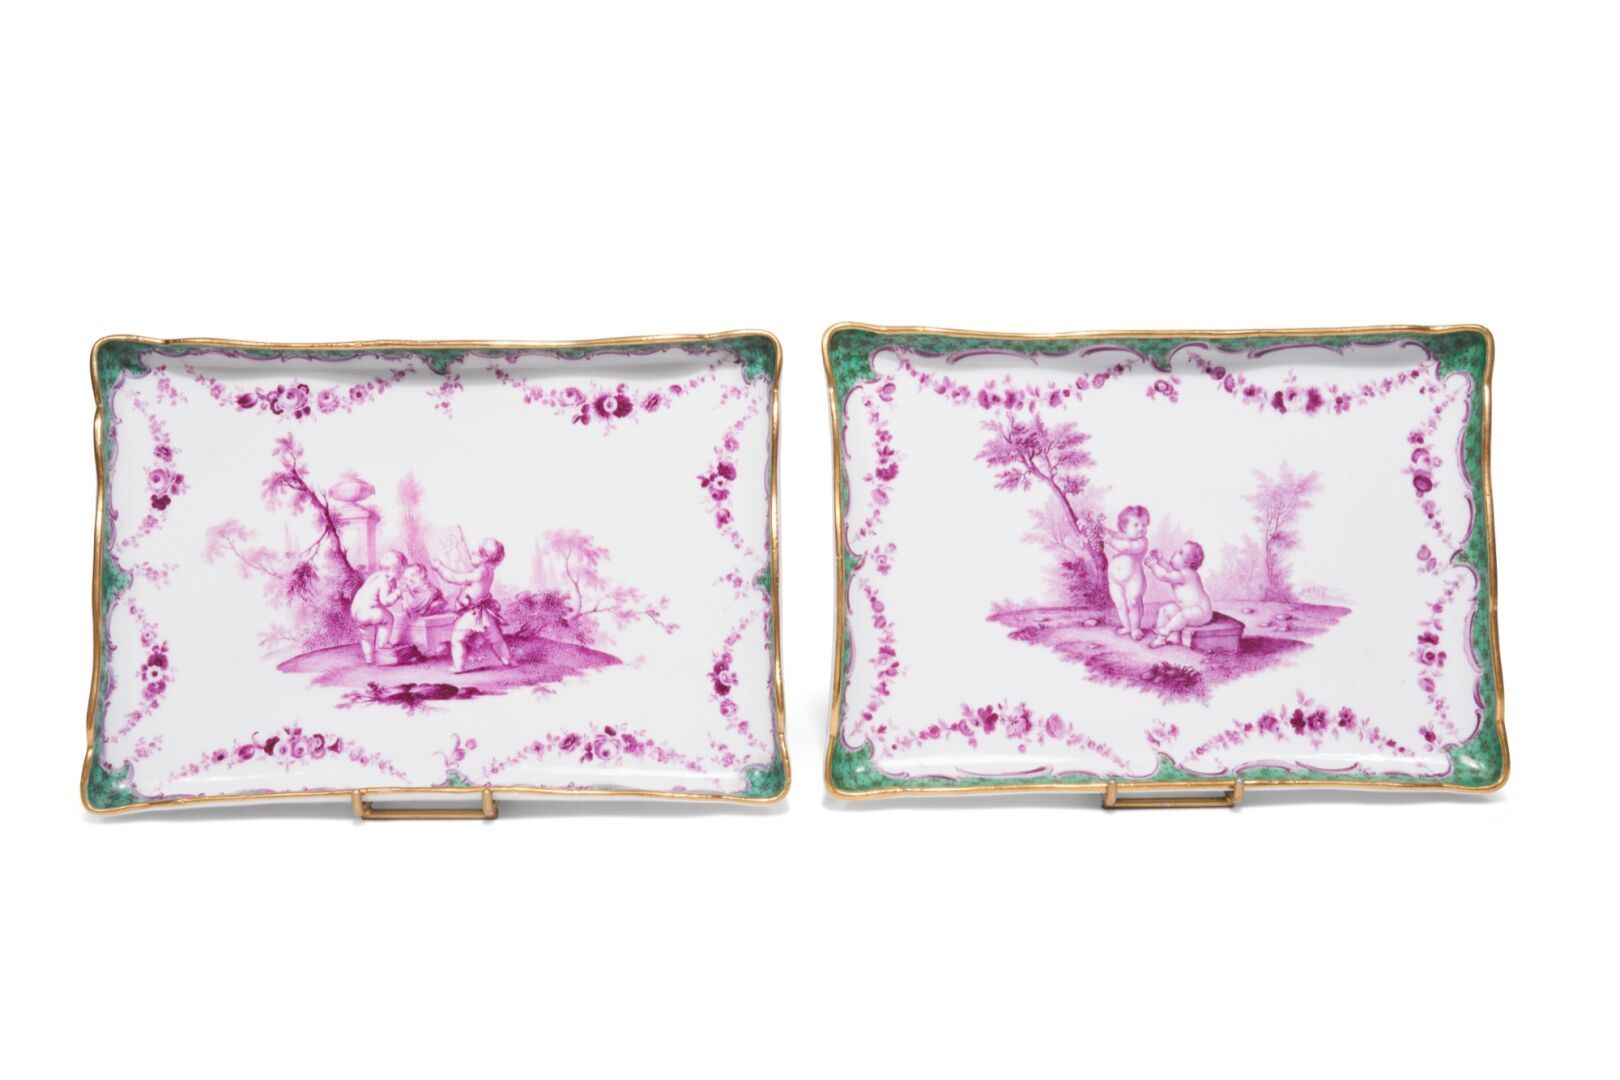 Null MEISSEN
Two rectangular trays in porcelain with decoration in purple monoch&hellip;